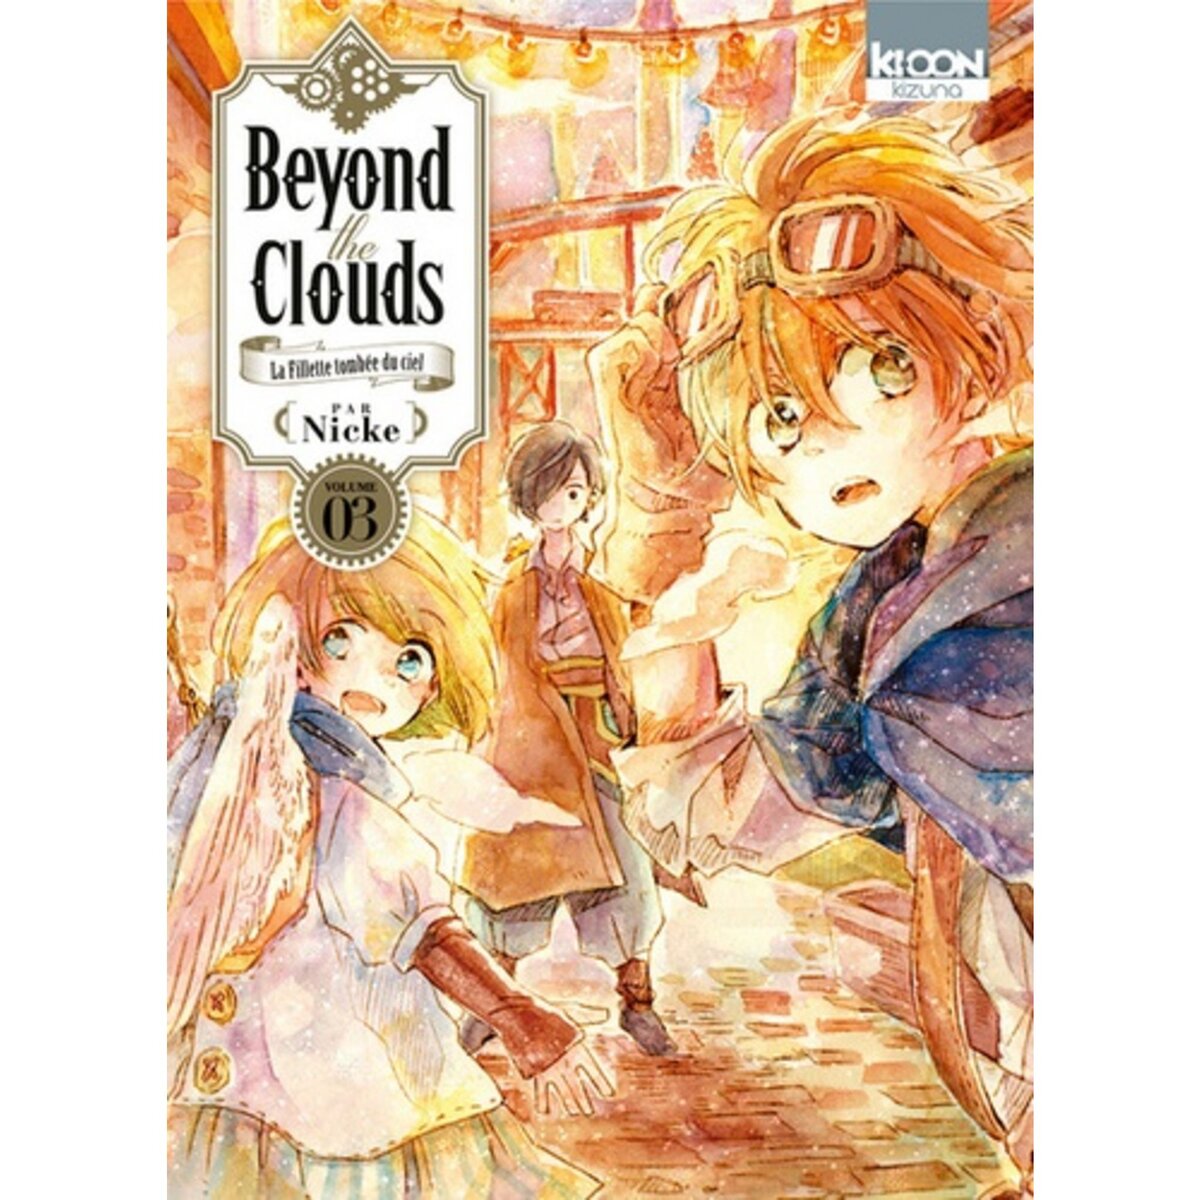  BEYOND THE CLOUDS TOME 3 , Nicke